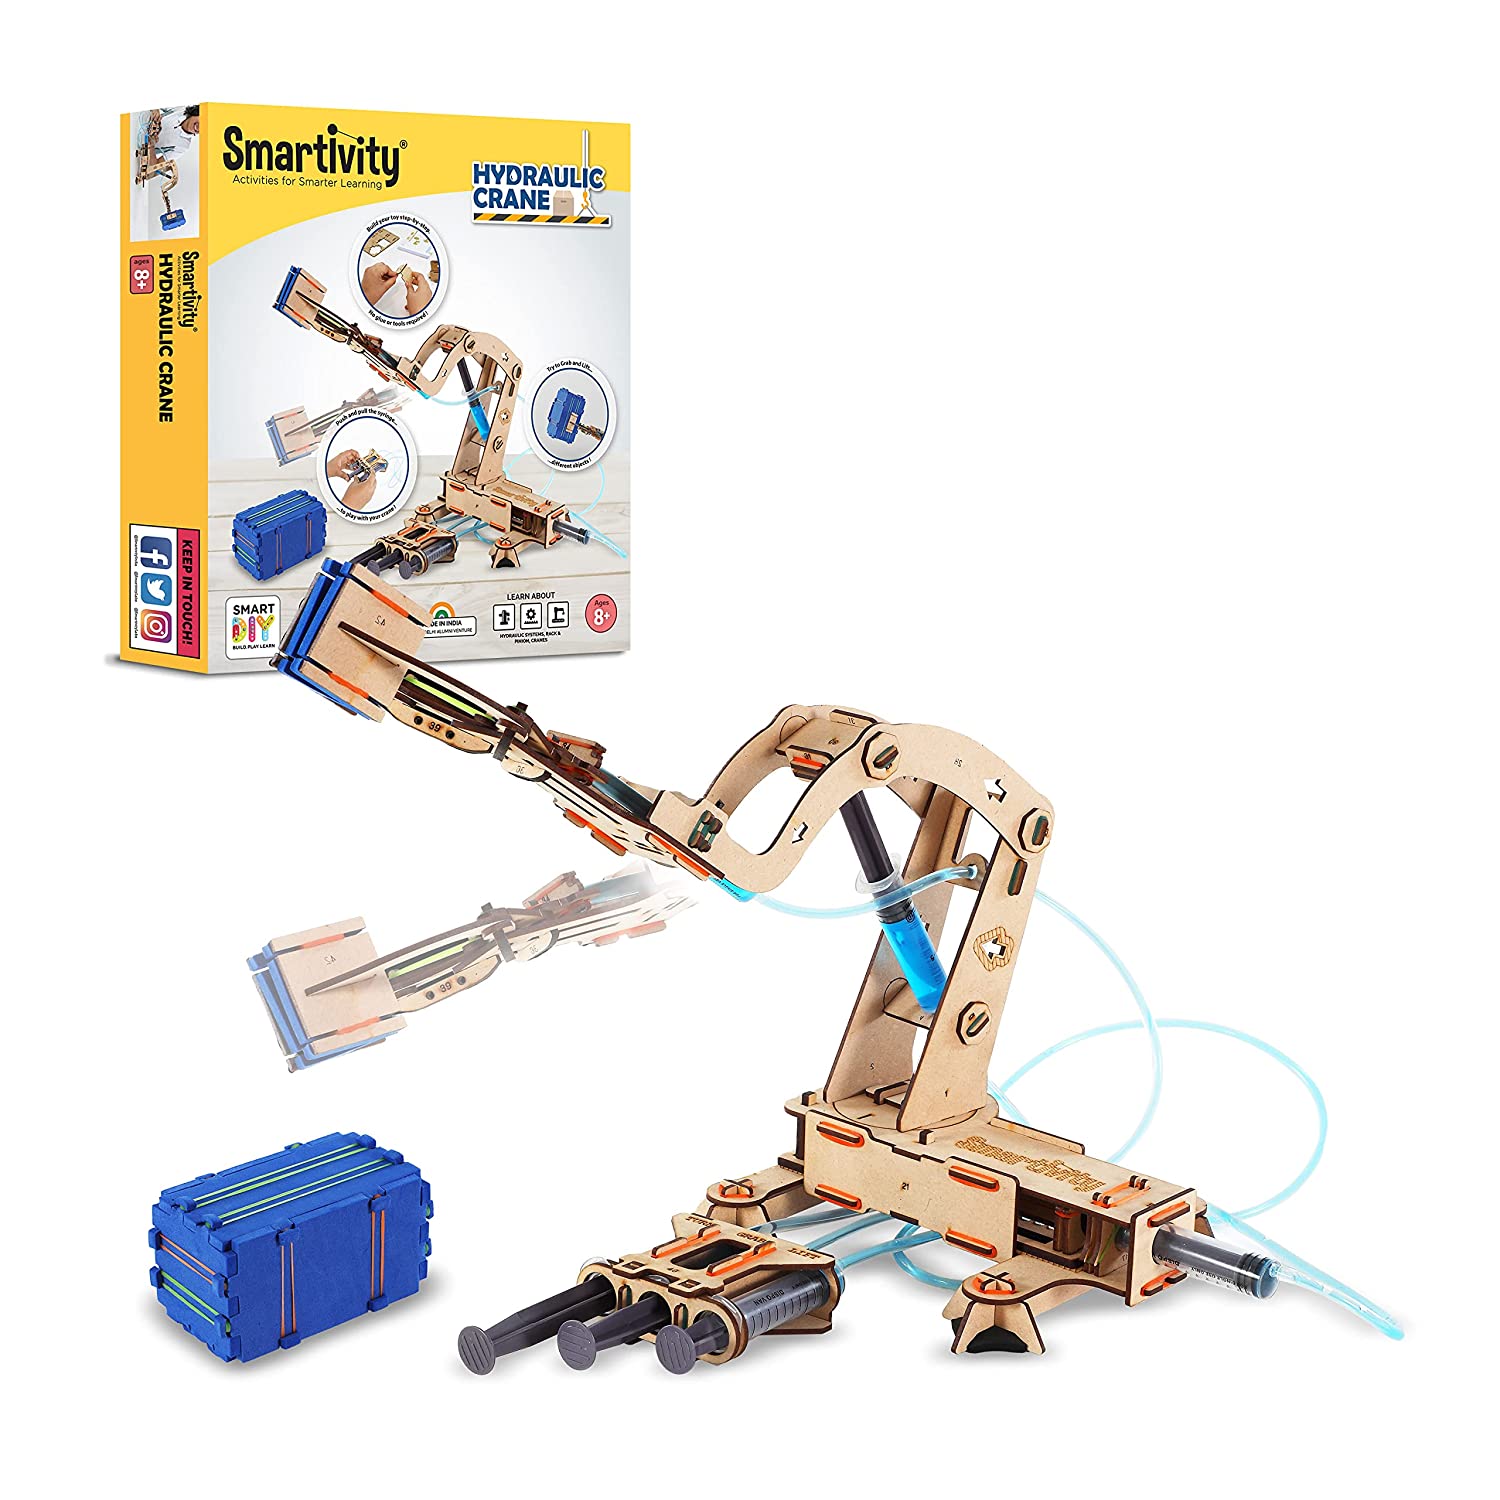 Smartivity Hydraulic Crane, STEM DIY Fun Toy, Educational & Construction Based Activity Game Kit for Kids 6 to 14, Best Birthday Gift for Boys & Girls 6-8-10-12-14 Years Old, Made in India Pack of 5